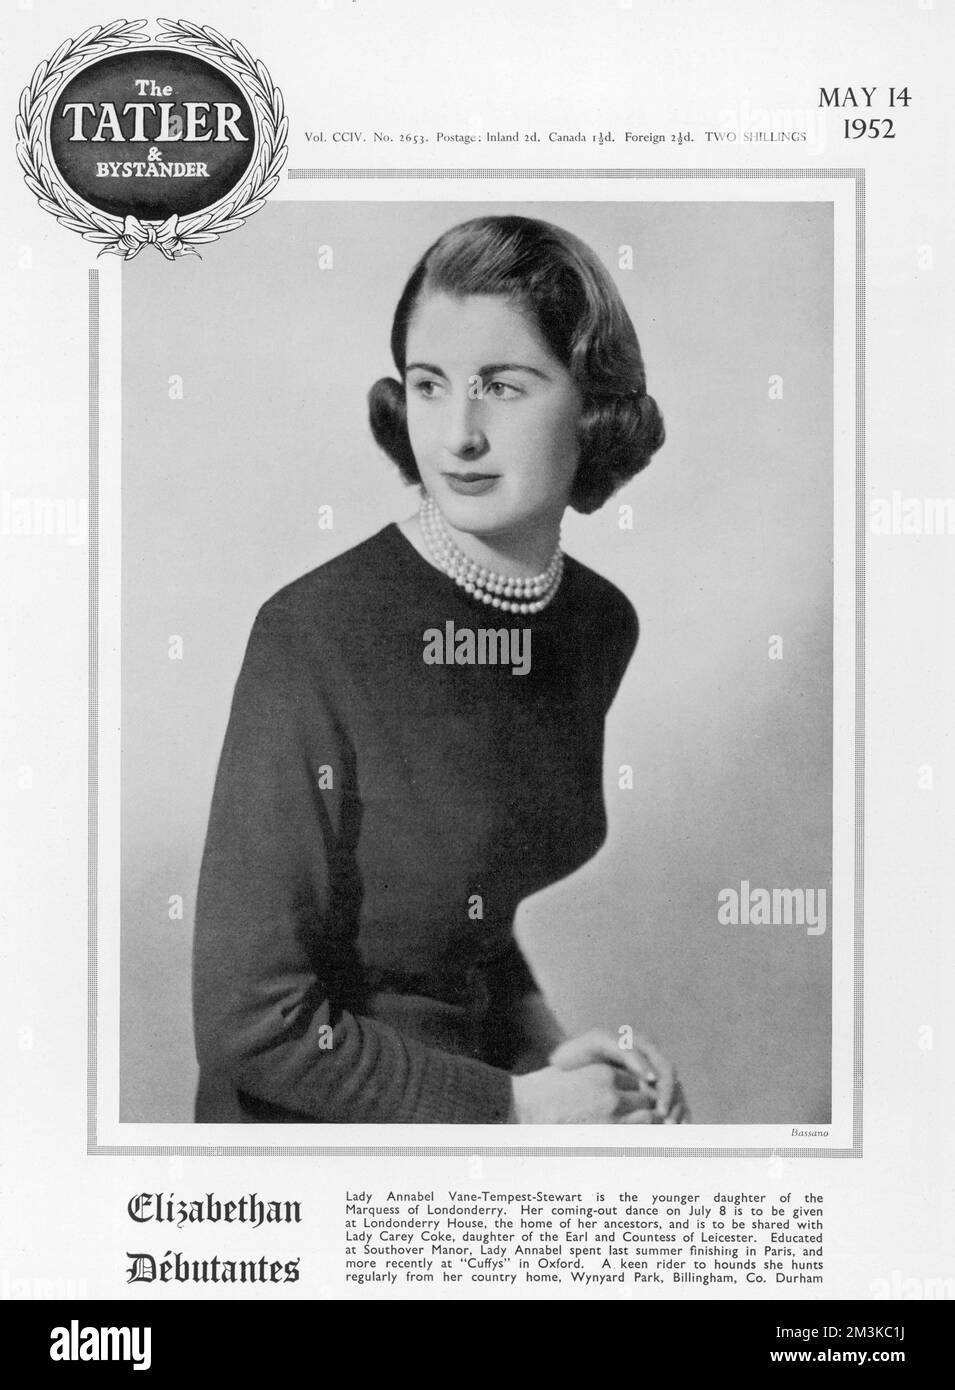 Lady Annabel Vane-Tempest-Stewart, the younger daughter of the Marquess of Londonderry. Shown here a couple of months before her coming-out dance on 8th July at Londonderry House, the home of her ancestors.      Date: 14th May 1952 Stock Photo